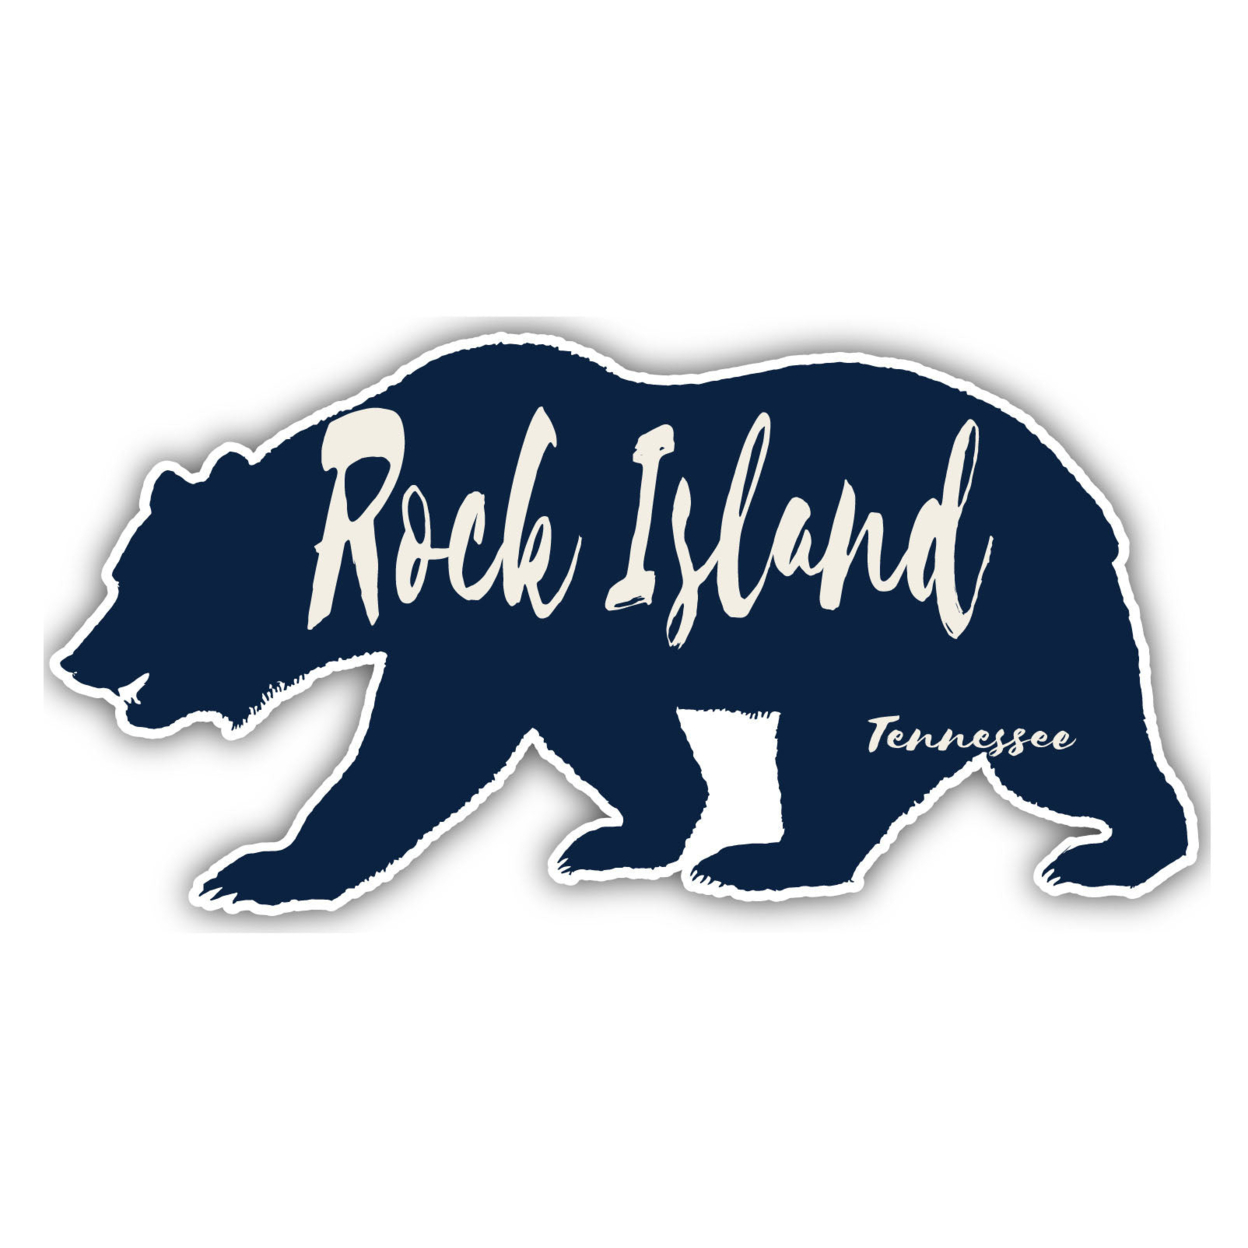 Rock Island Tennessee Souvenir Decorative Stickers (Choose Theme And Size) - Single Unit, 4-Inch, Adventures Awaits